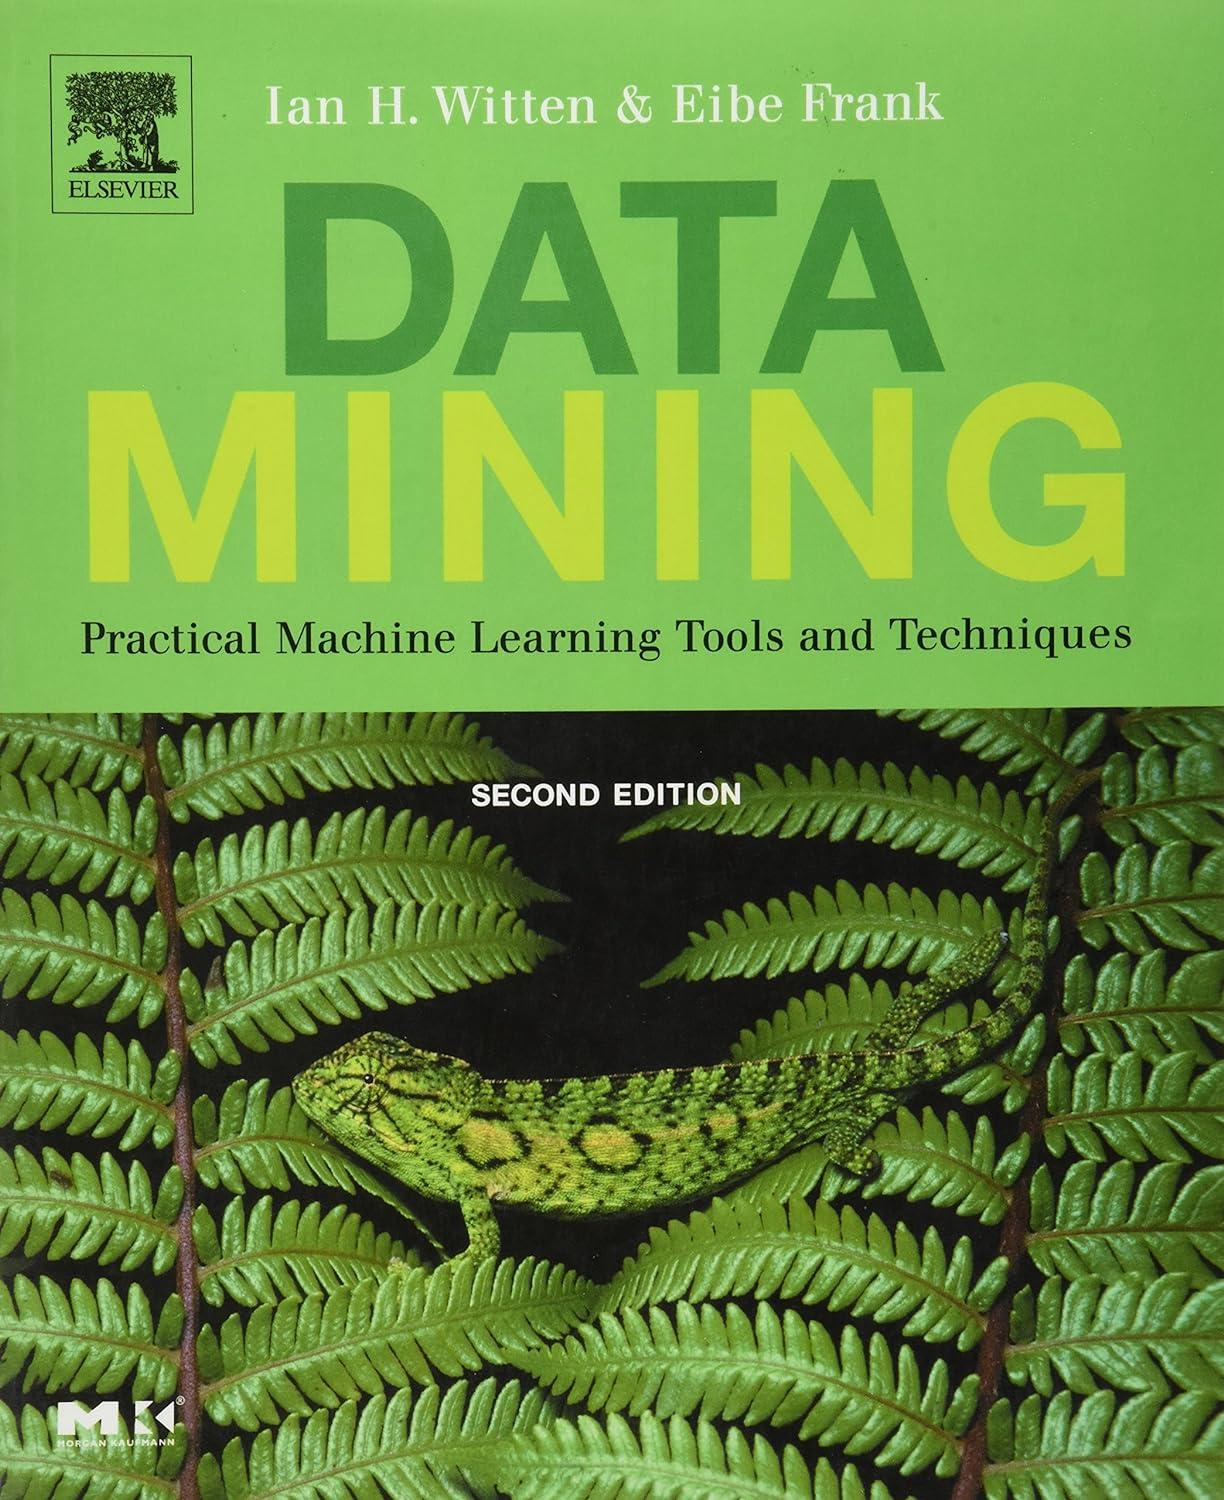 data mining  practical machine learning tools and techniques 2nd edition ian h. witten , eibe frank